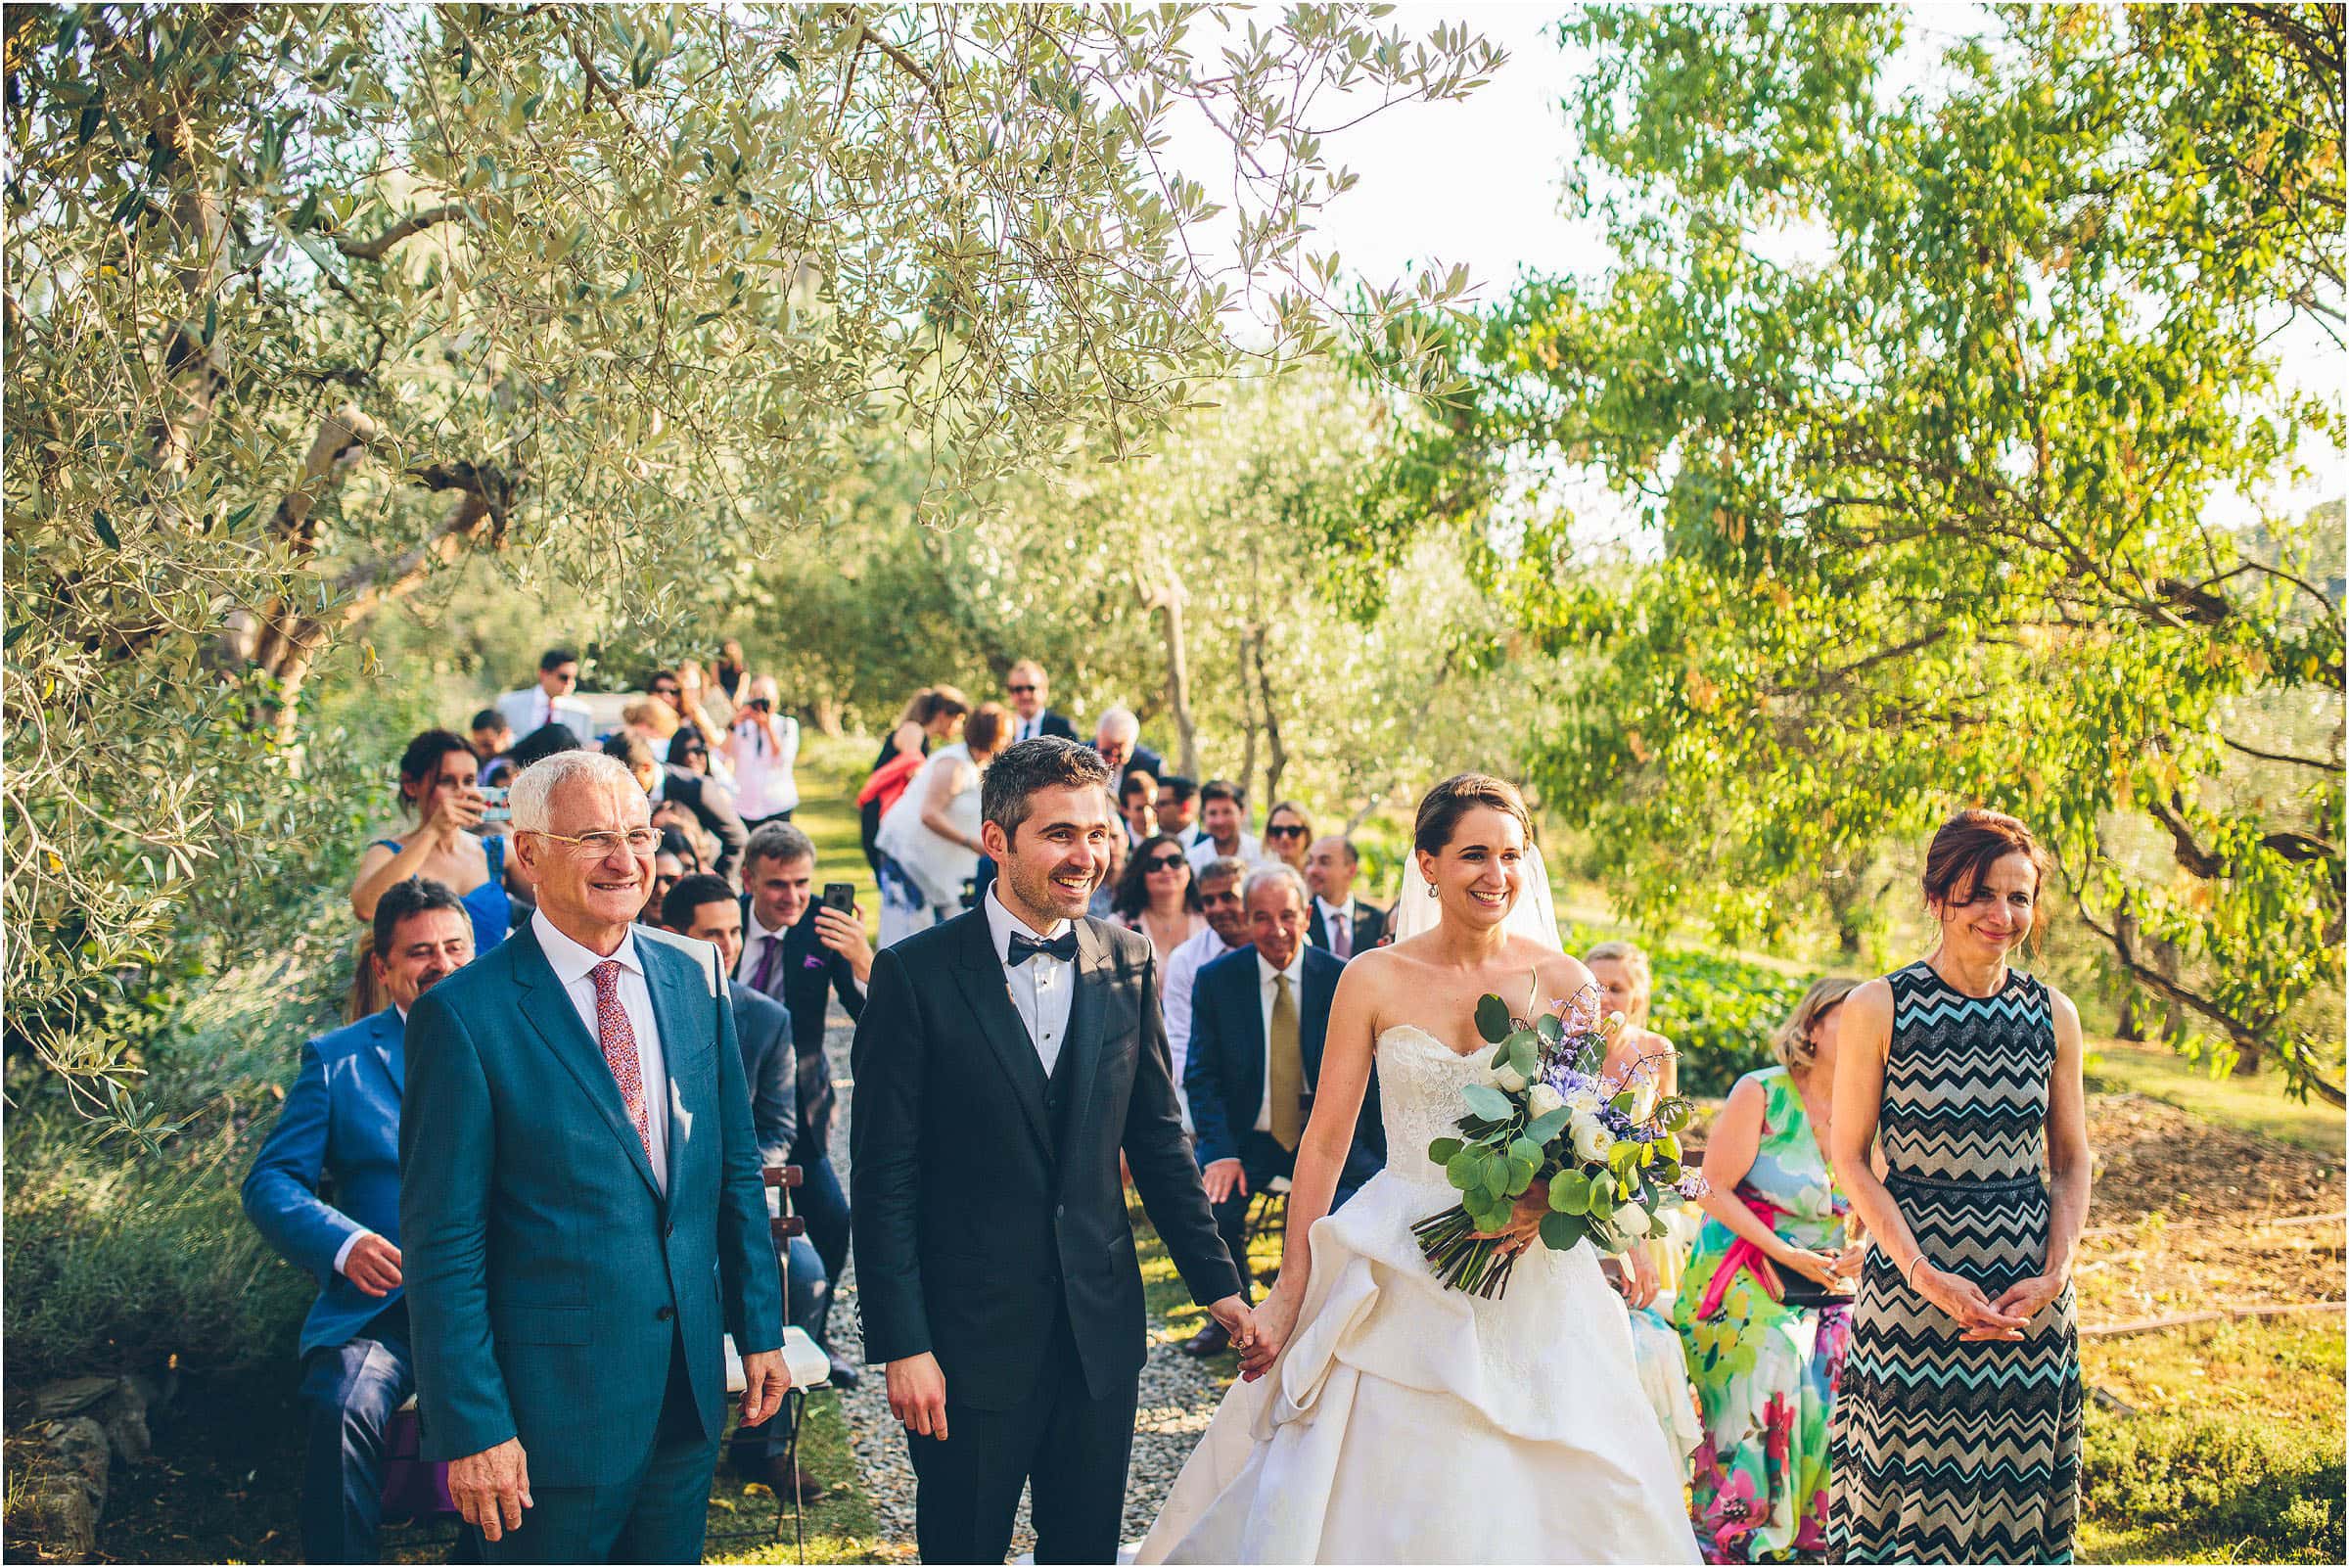 The bride and groom hold hands in front of guests in a photo by destination wedding photographer The Crawleys